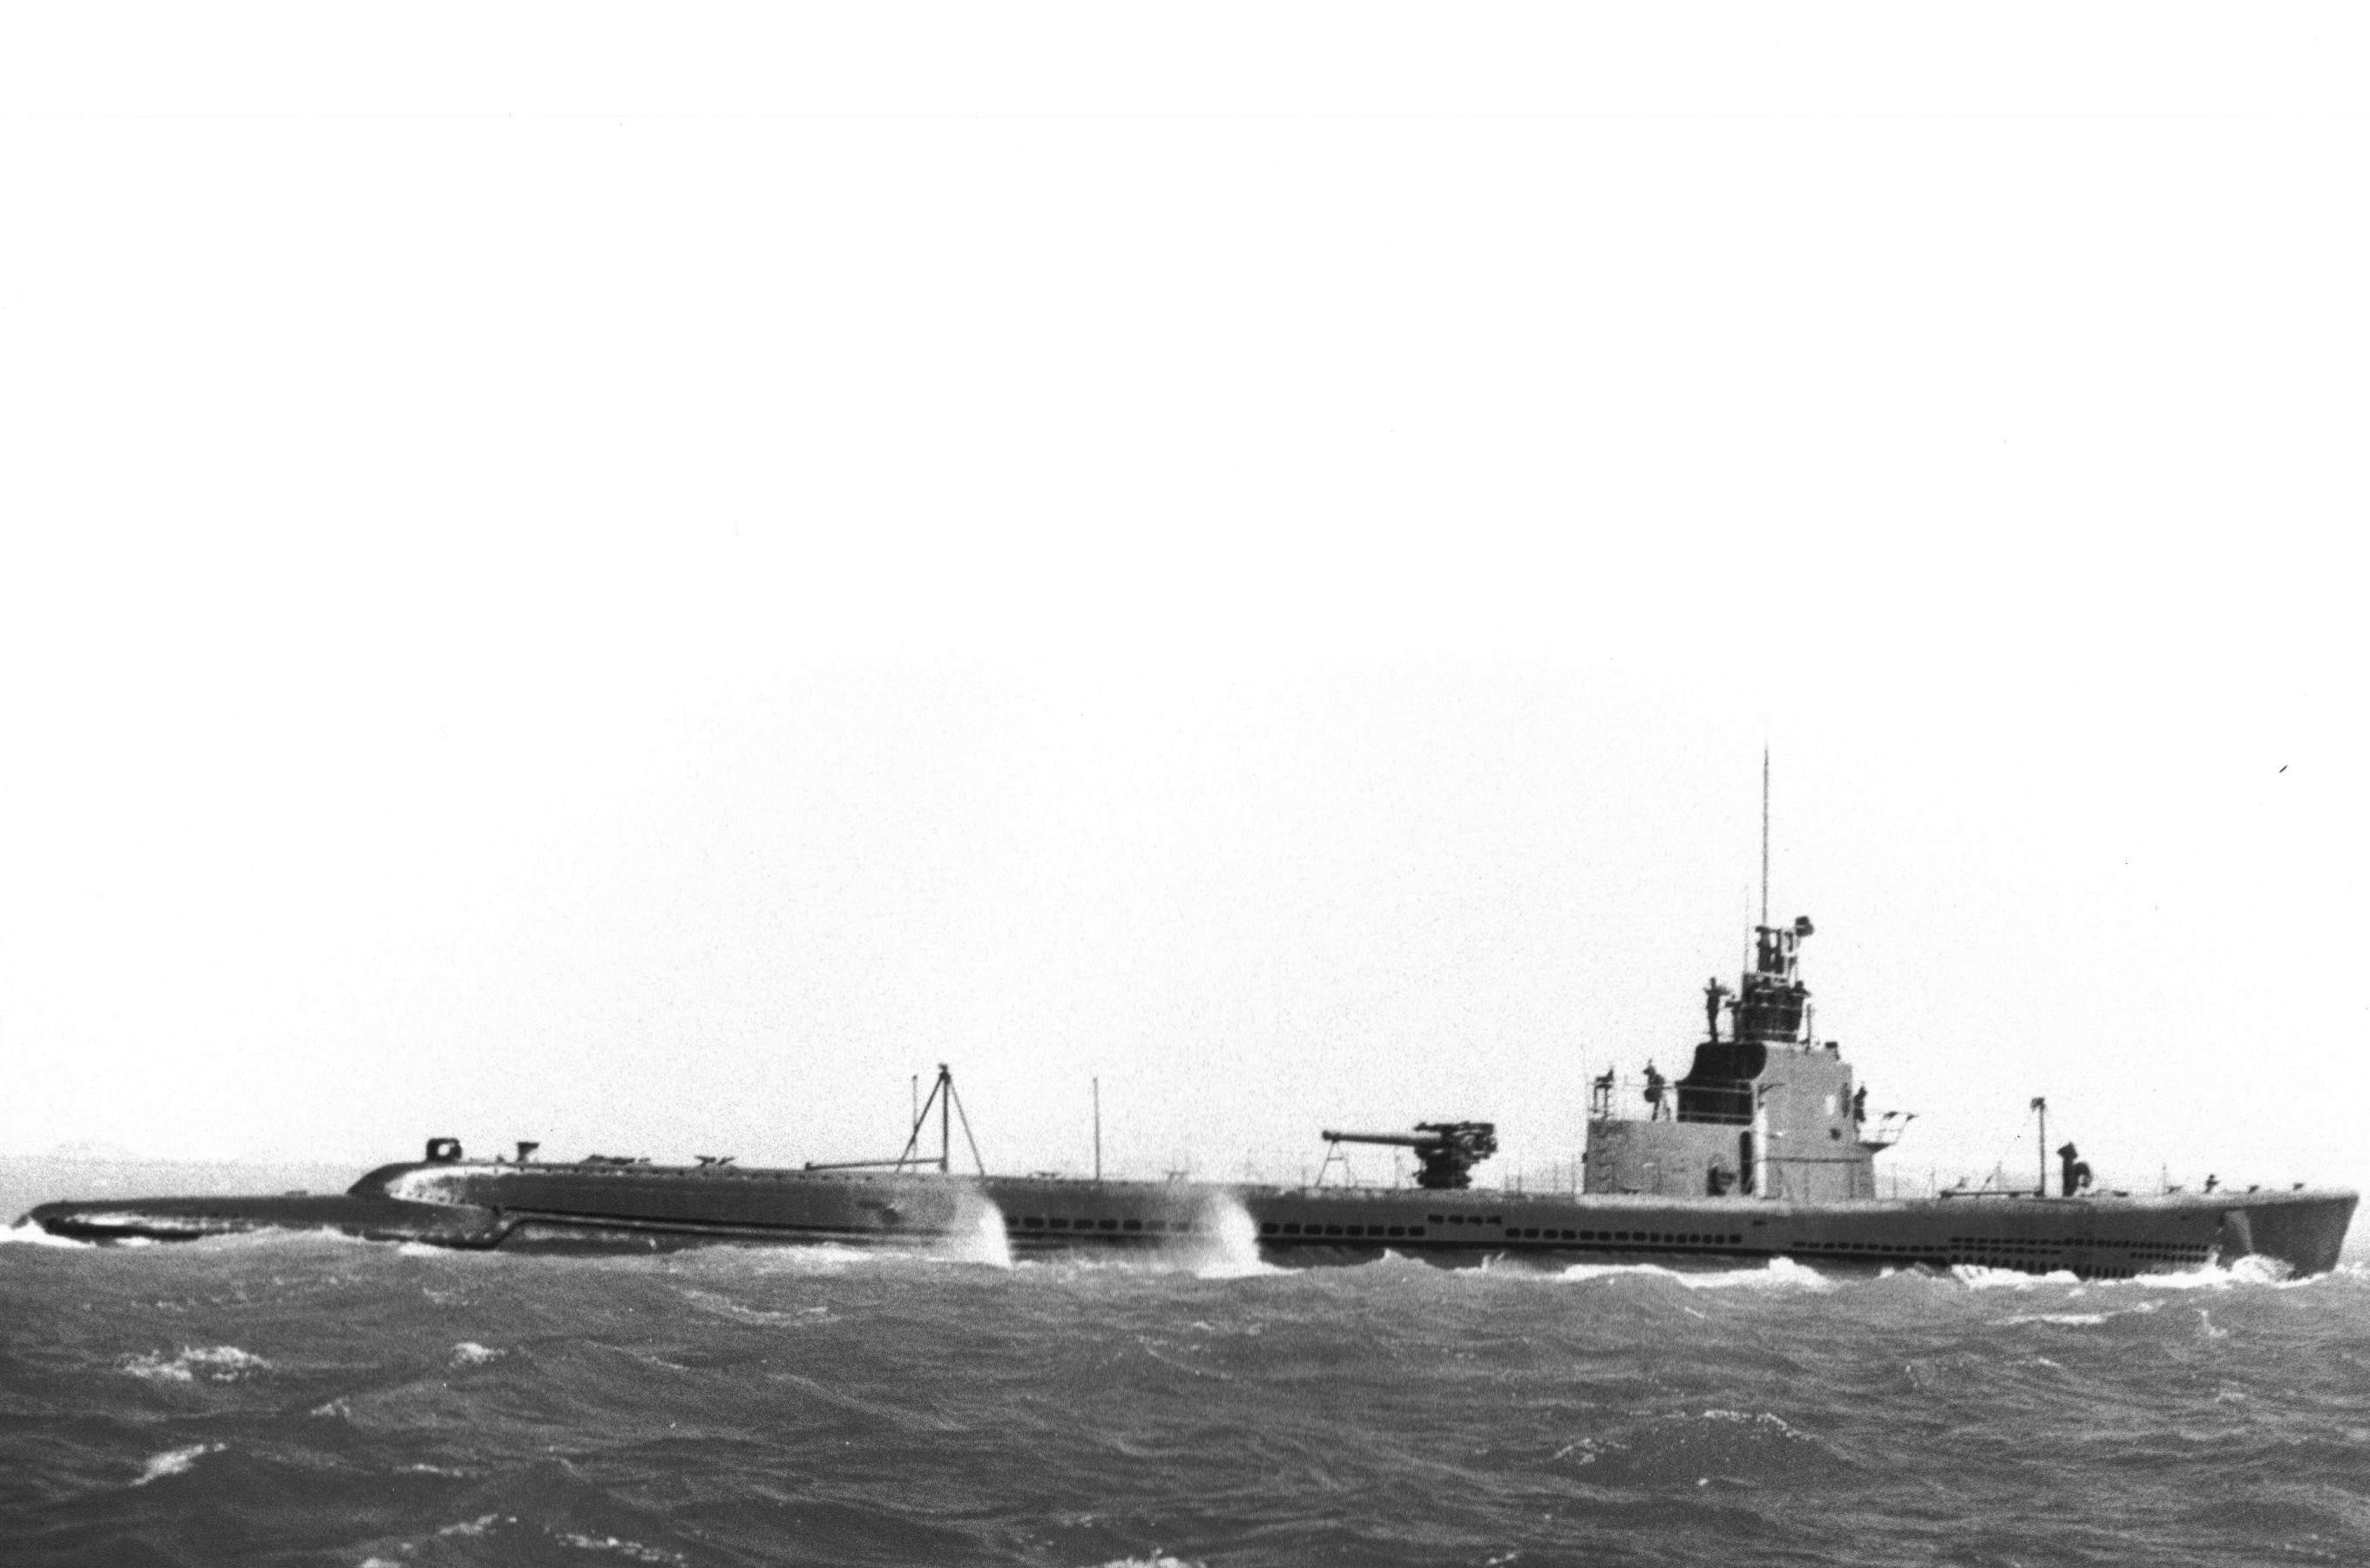 Starboard side view of USS Grayback off Hunter's Point, San Francisco, California, United States, 26 Aug 1943, photo 2 of 2